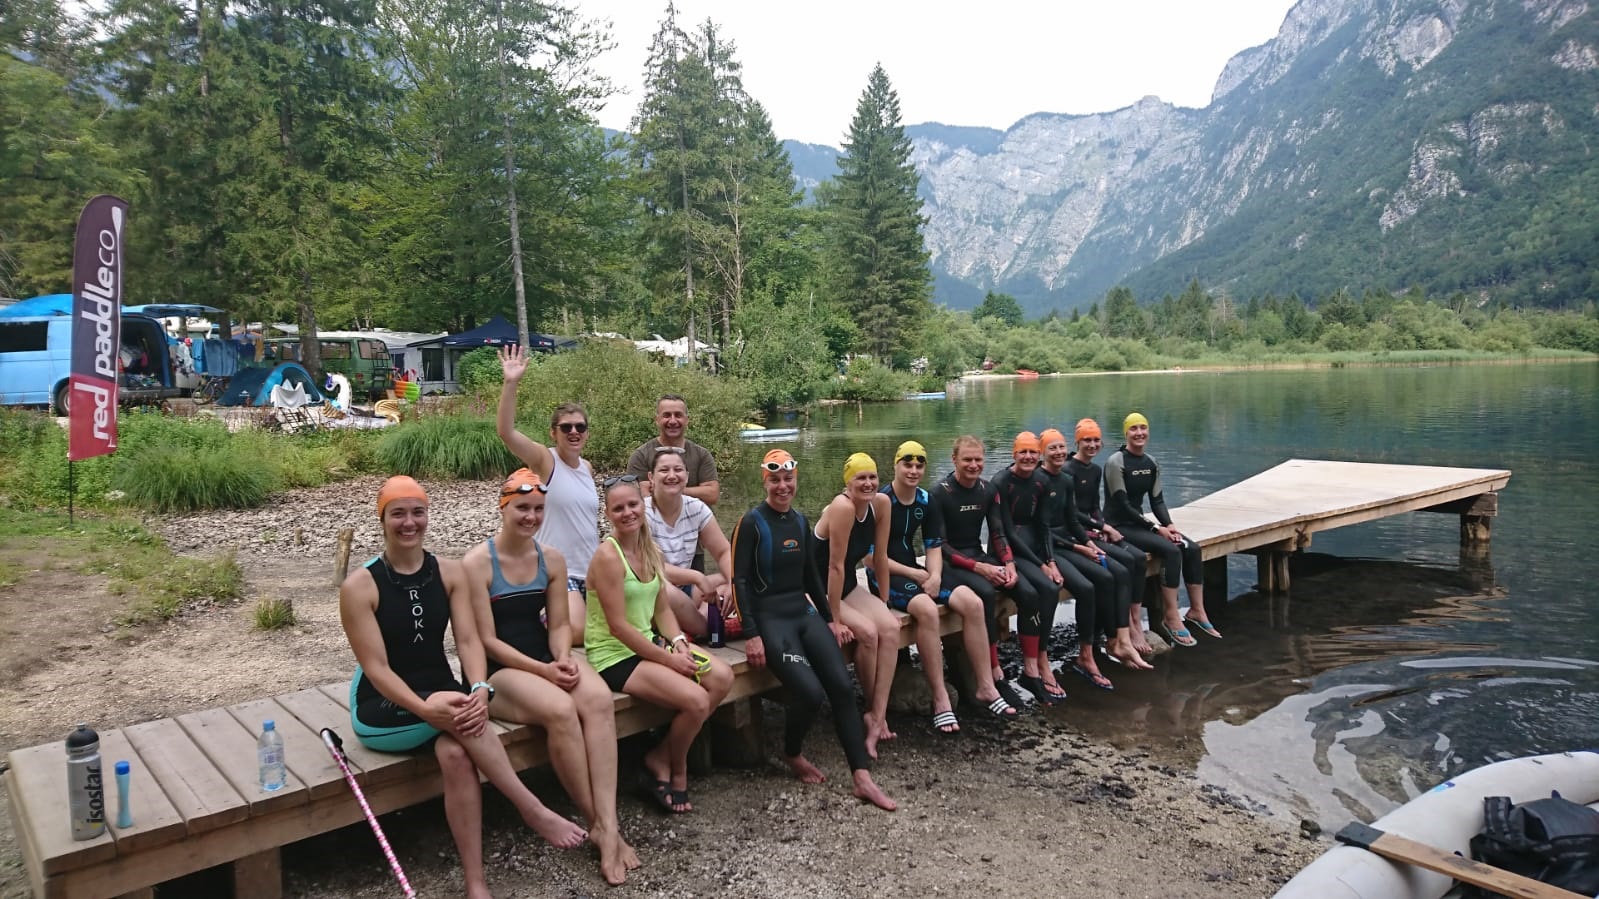 The swim crew decked out in swimsuits and wetsuits sitting on a small wooden dock in lake. Trees and mountain in background